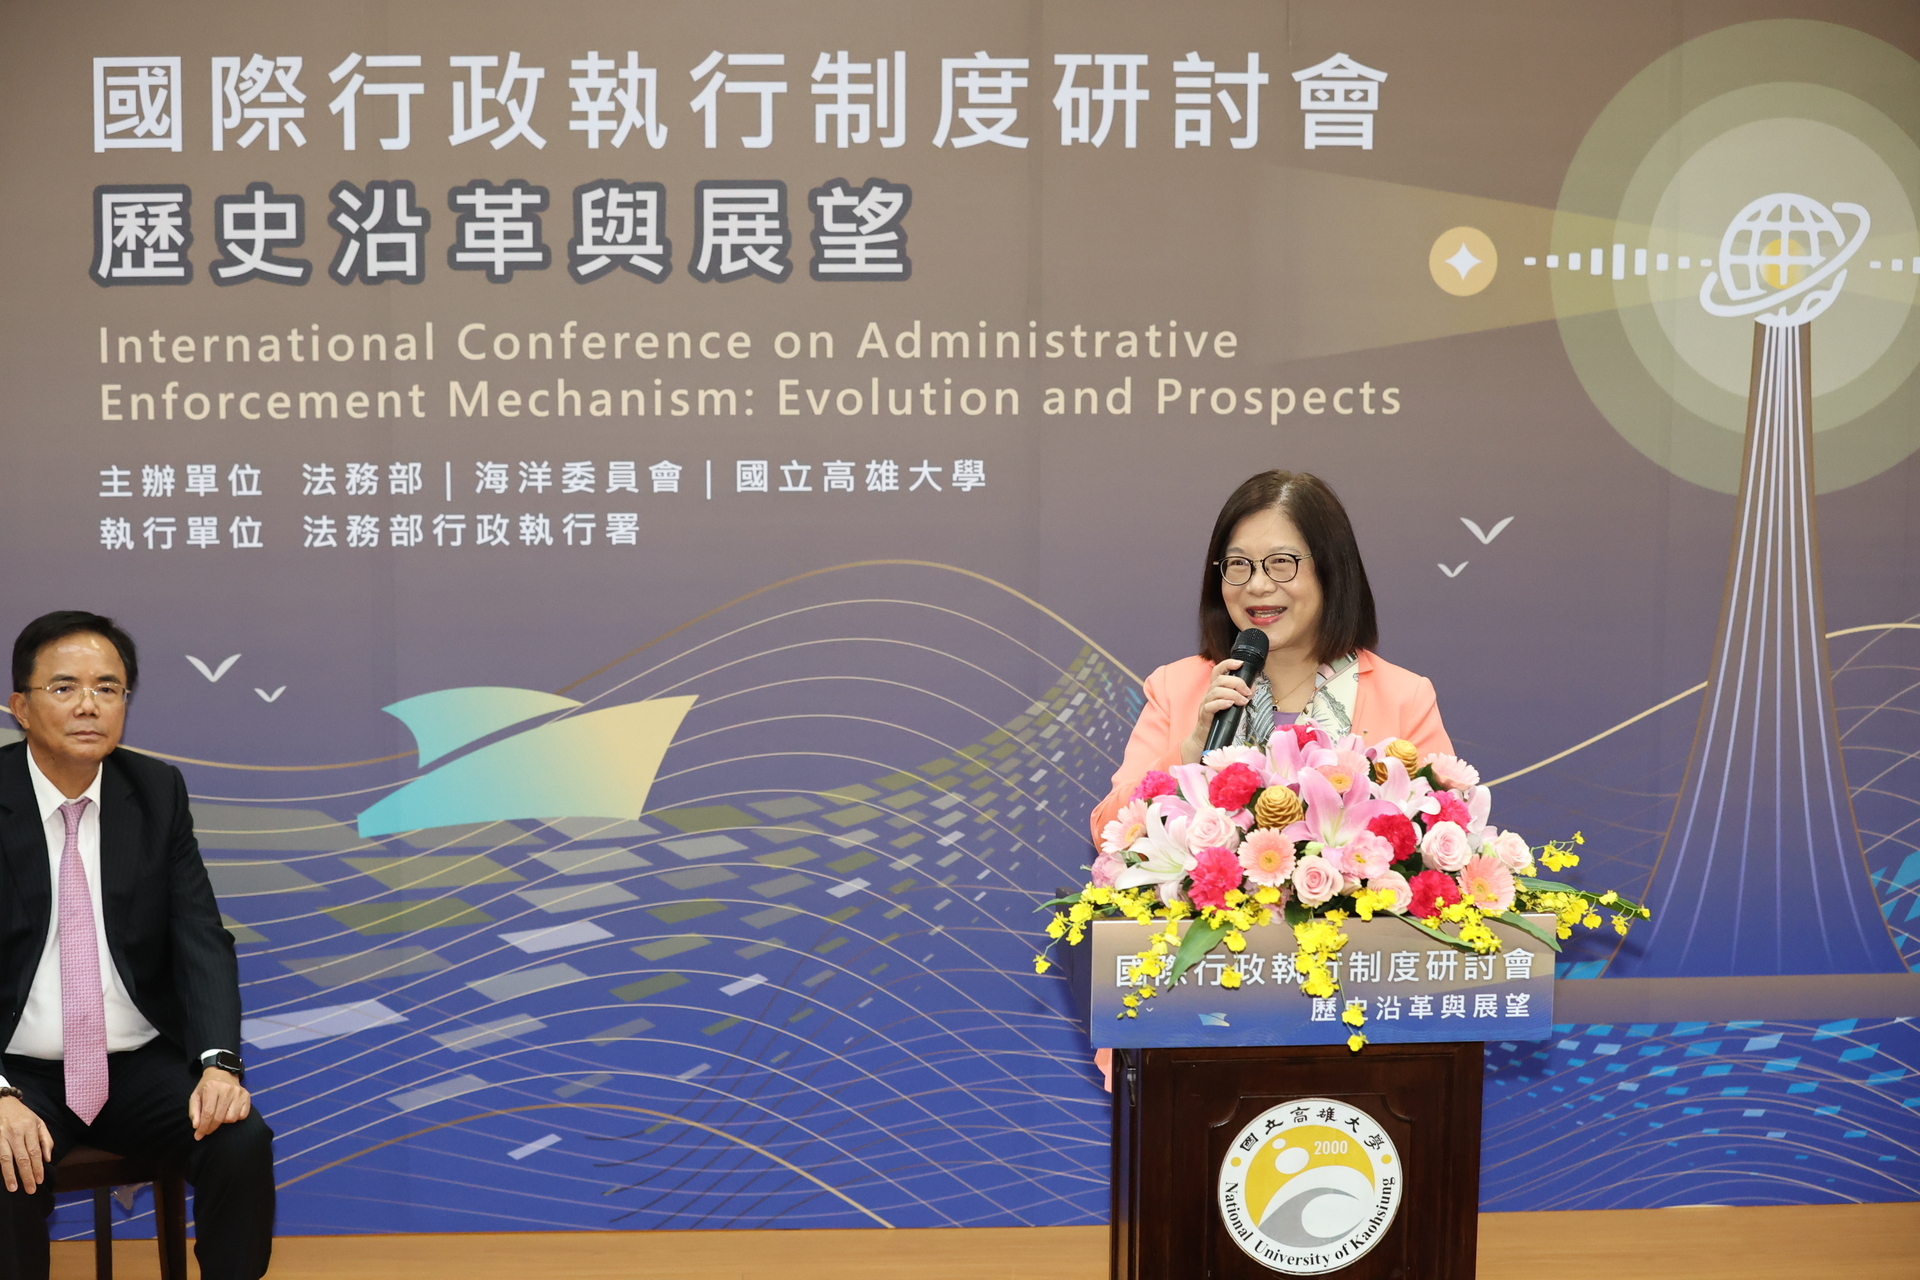 Deputy Minister of the Ministry of Justice, Bi-chung Tsai, delivers a speech.